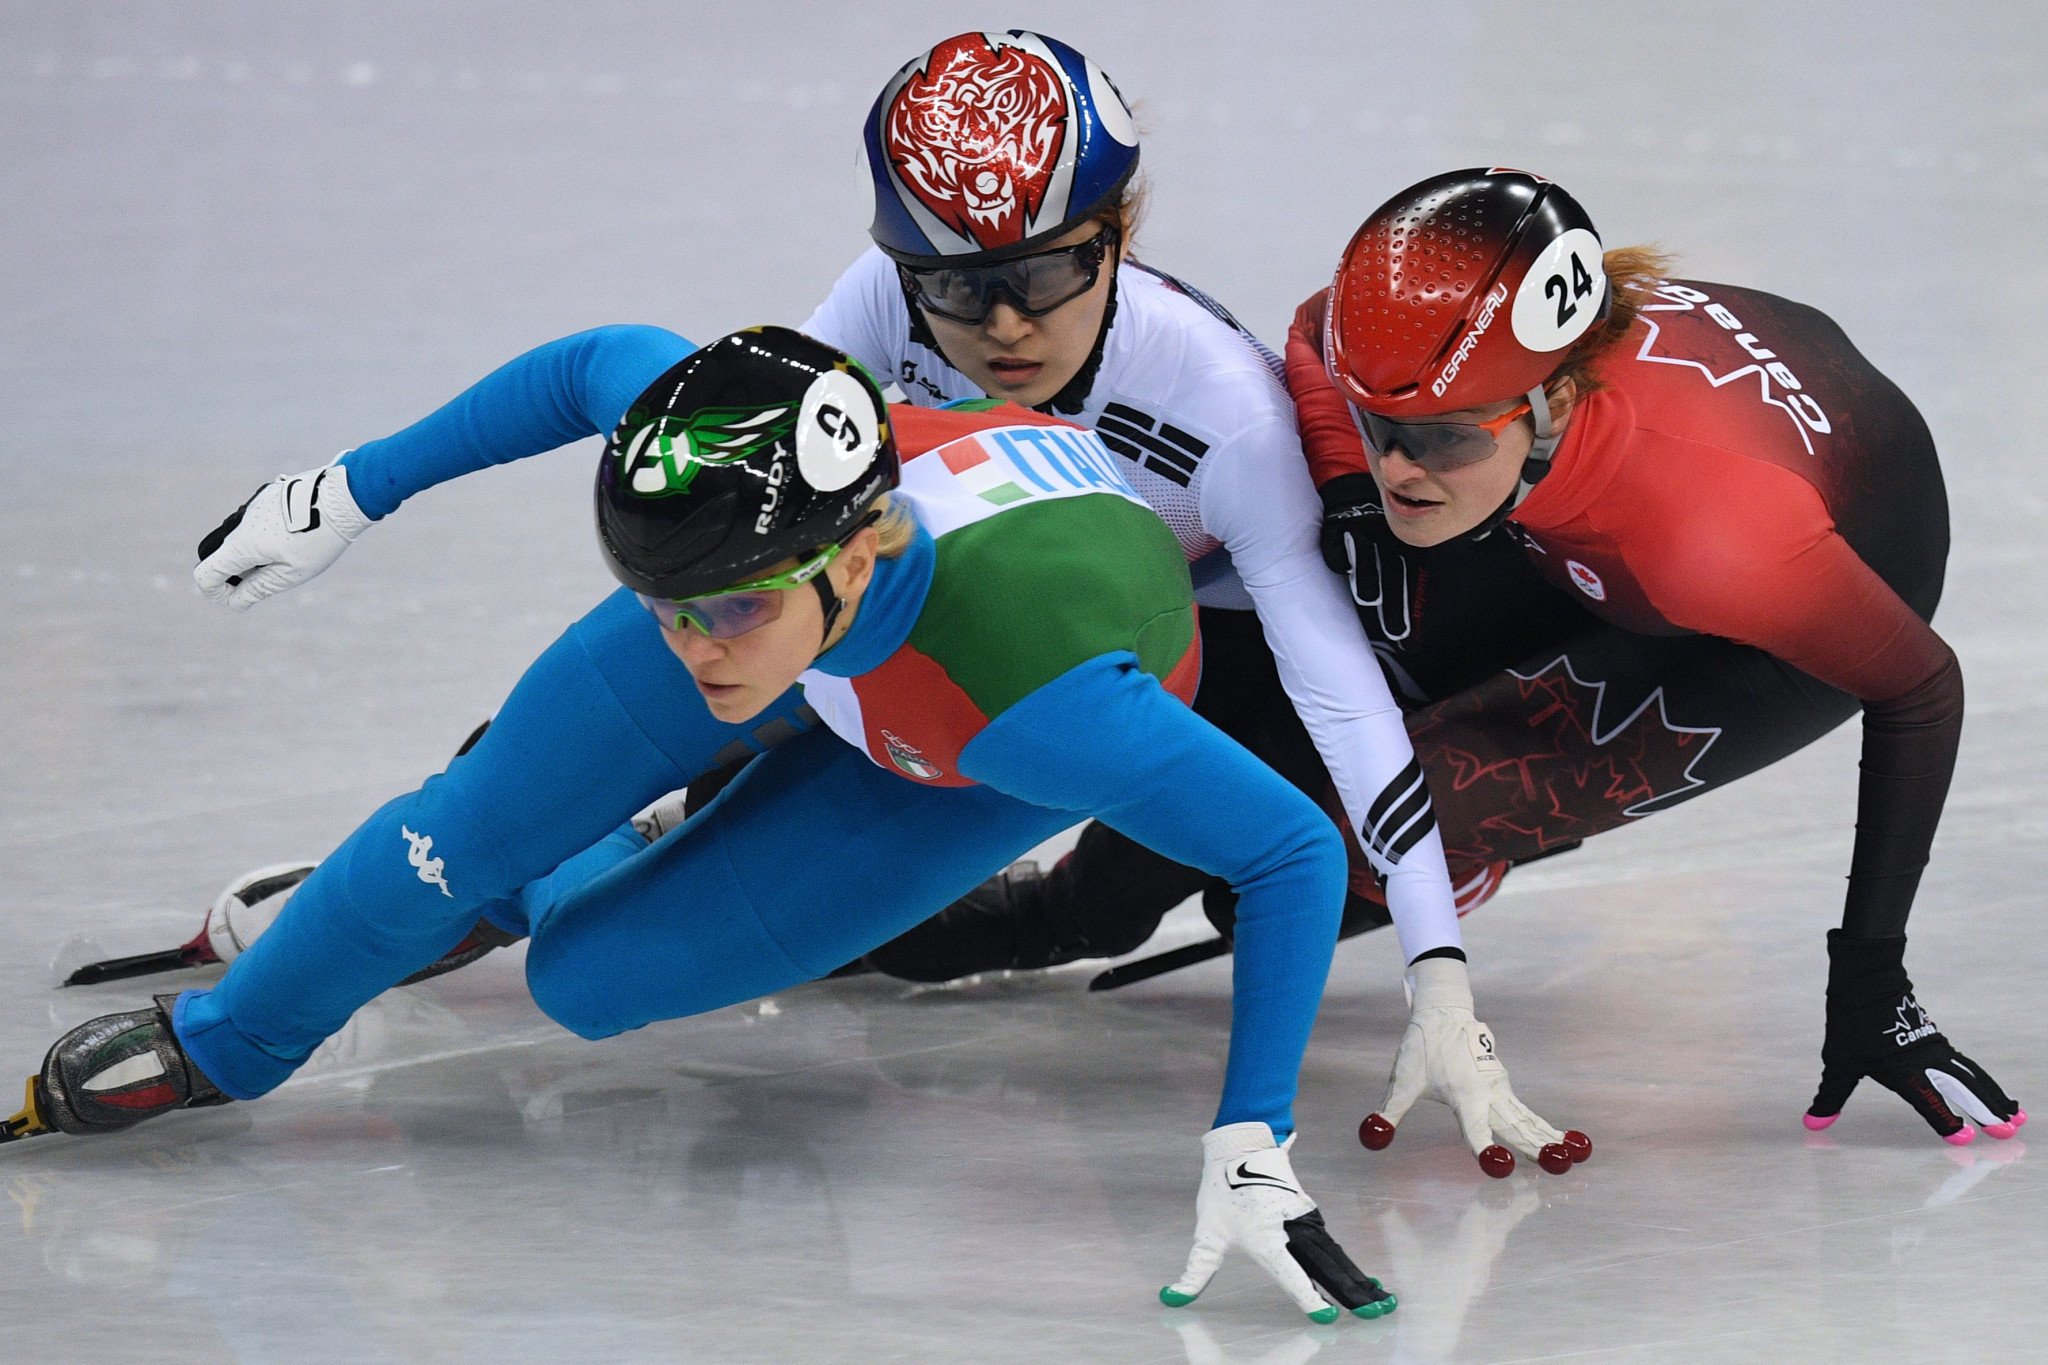 Kim Boutin, right, was promoted to bronze after the disqualification of South Korea's Choi Minjeong, centre ©Getty Images